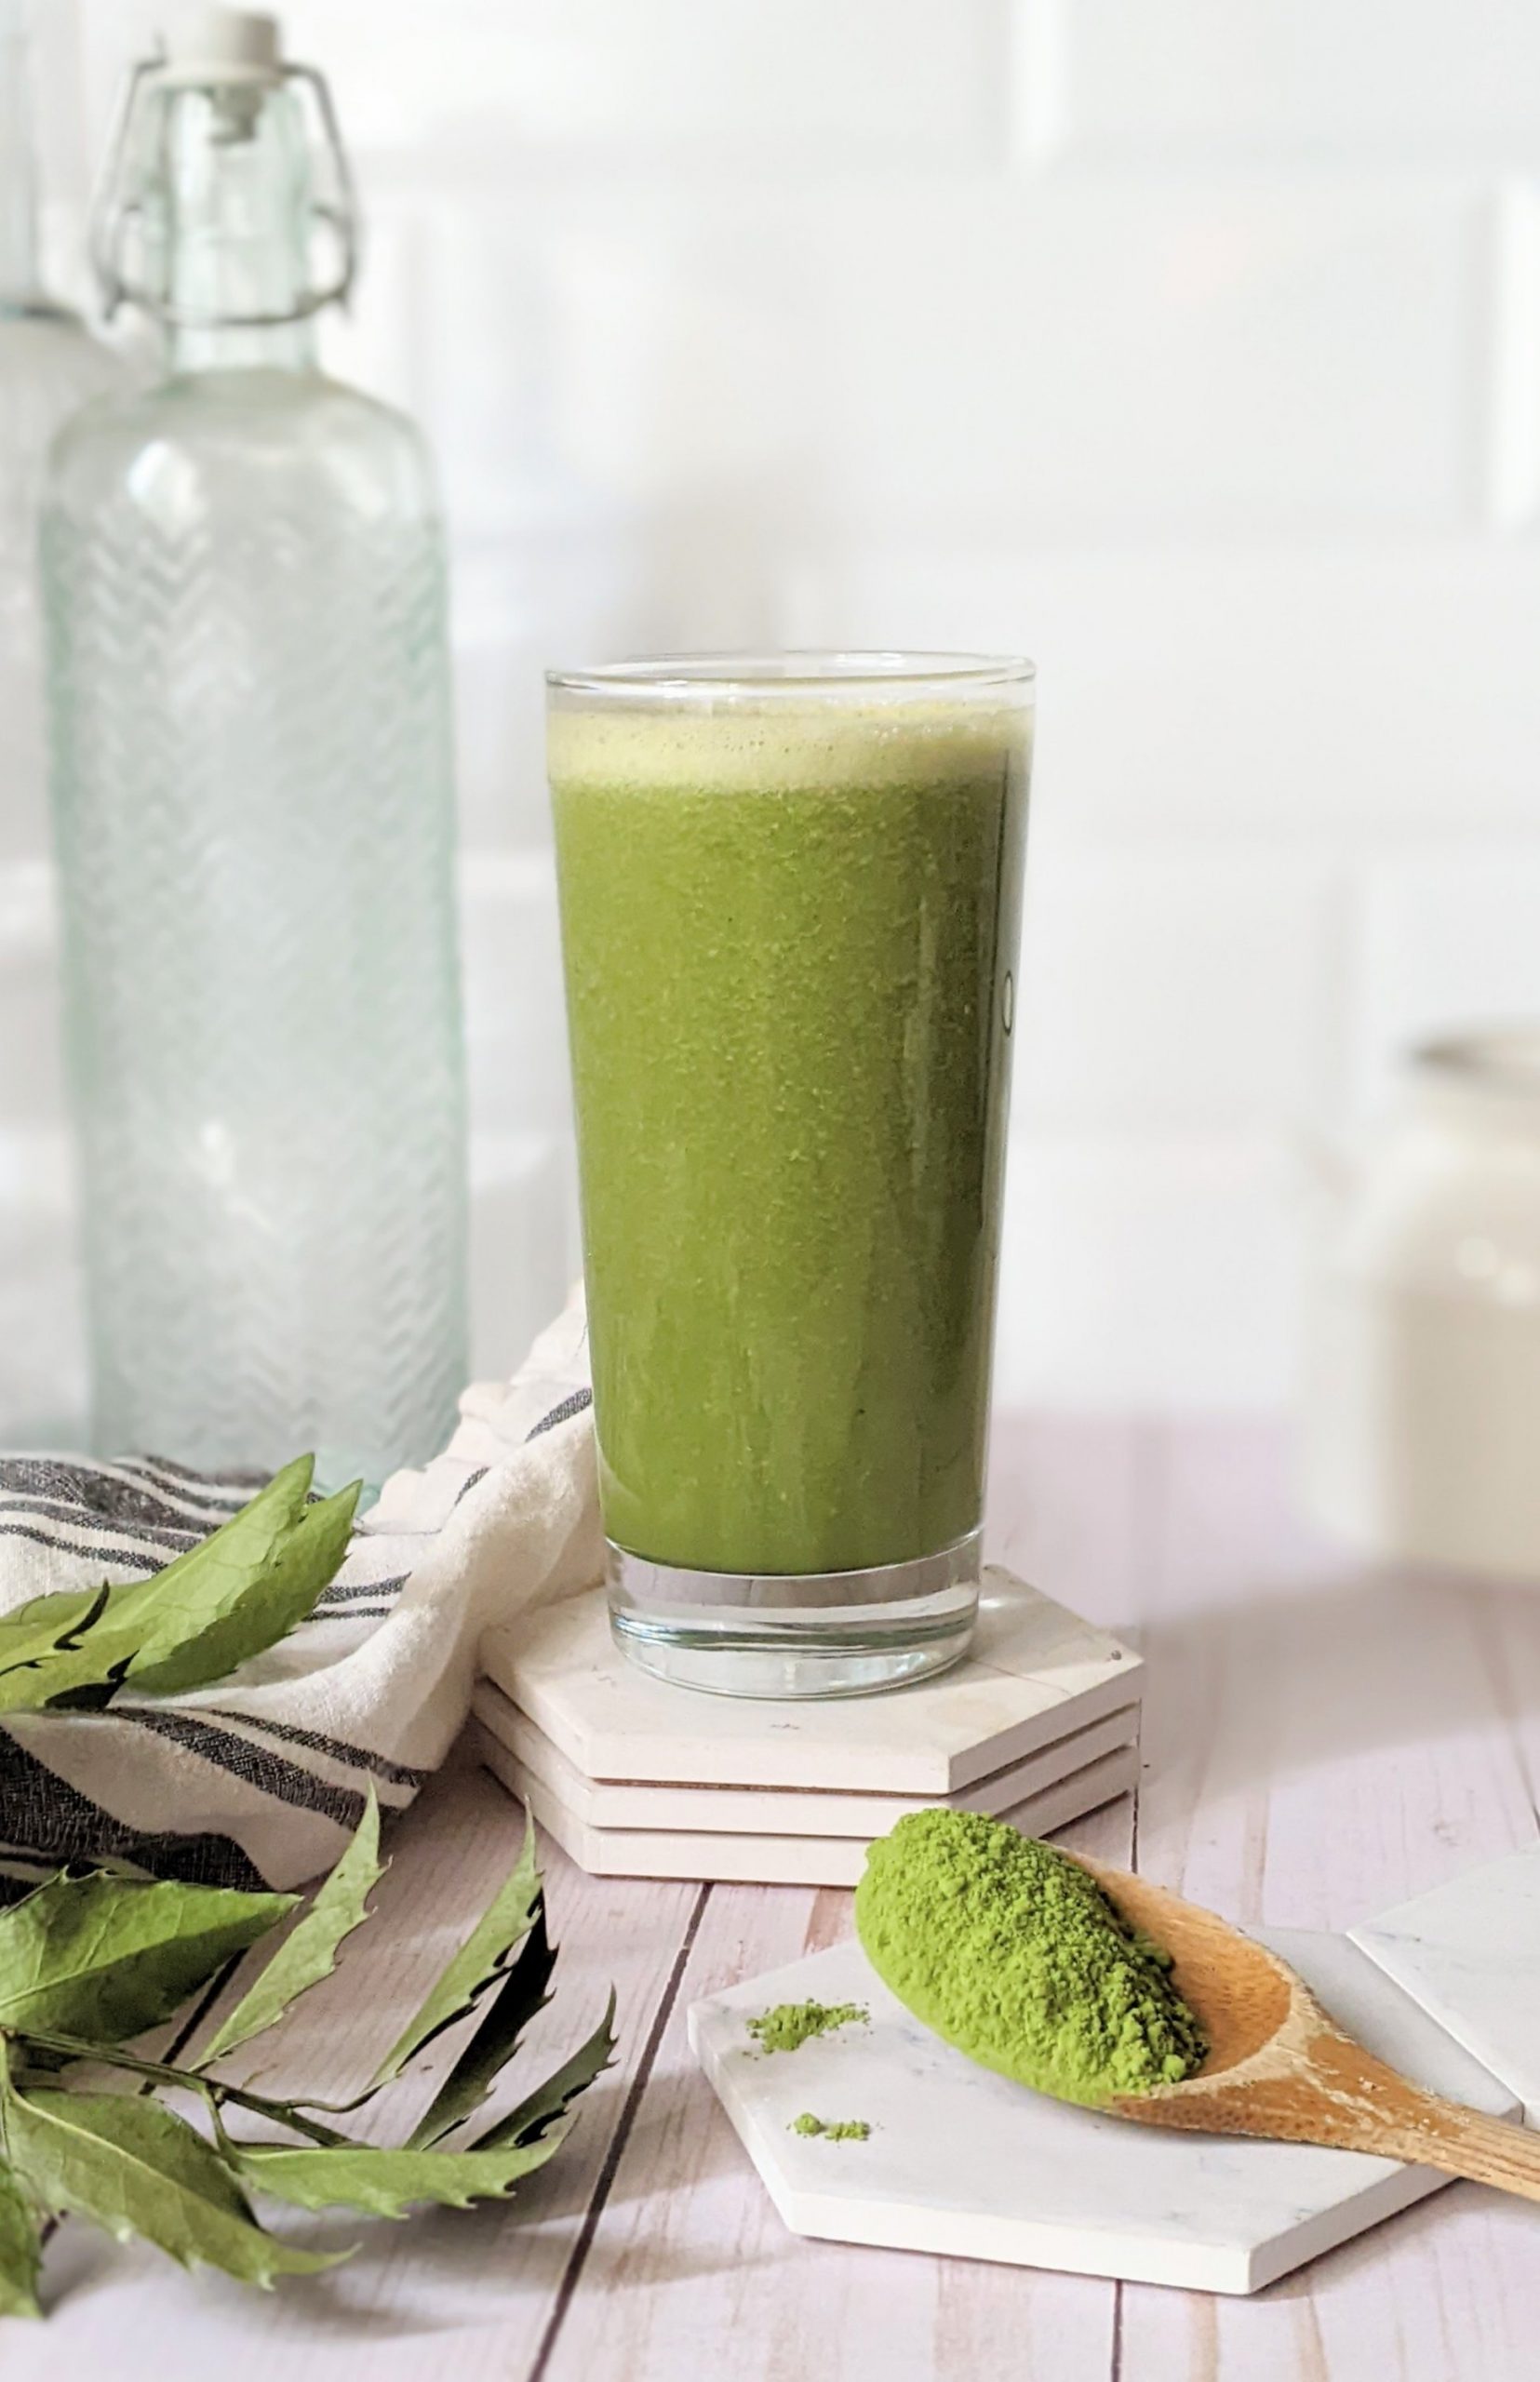 tropical matcha green tea smoothie recipe with banana pineapple oranges water ice almond milk and flaxseed vegan gluten free dairy free healthy matcha recipes breakfast